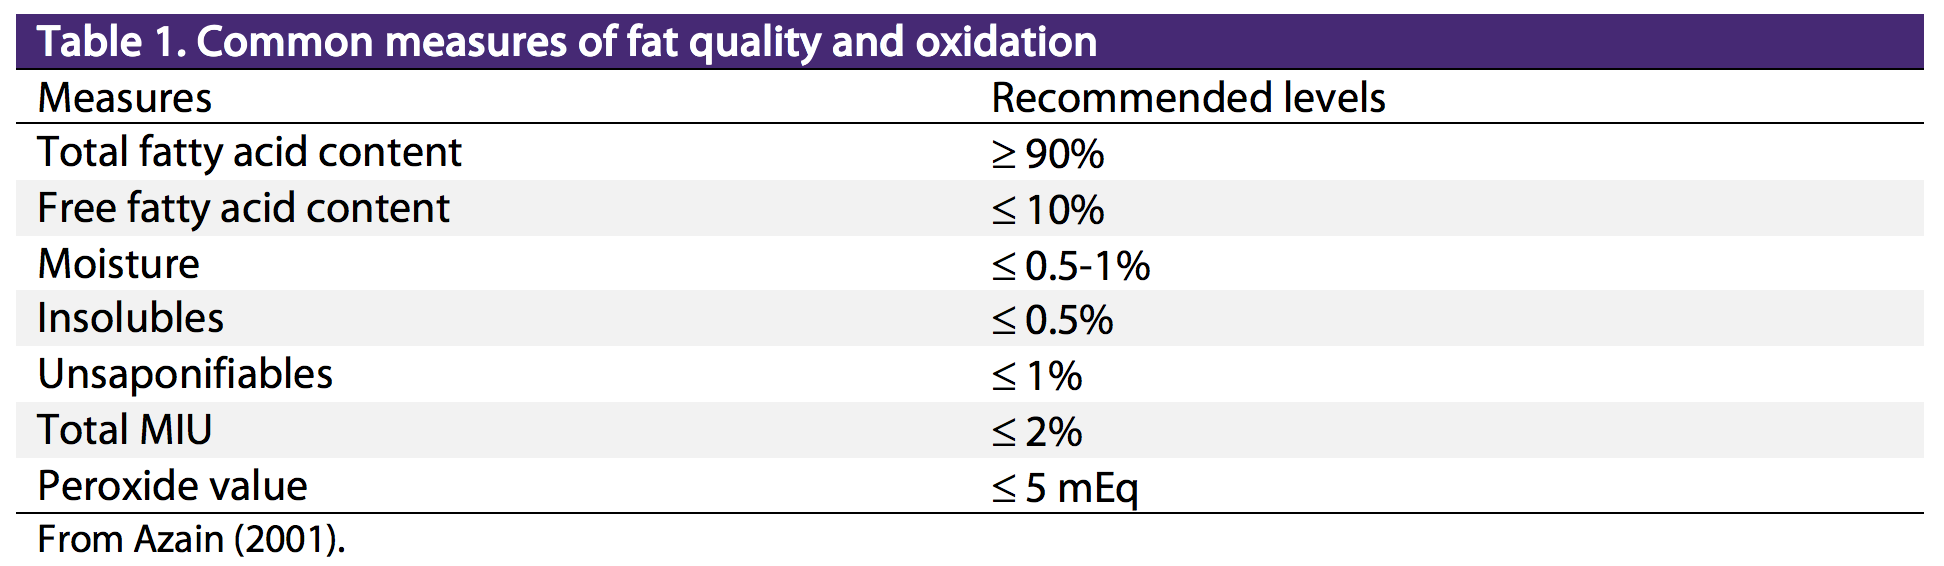 Measures of fat quality and oxidation for swine